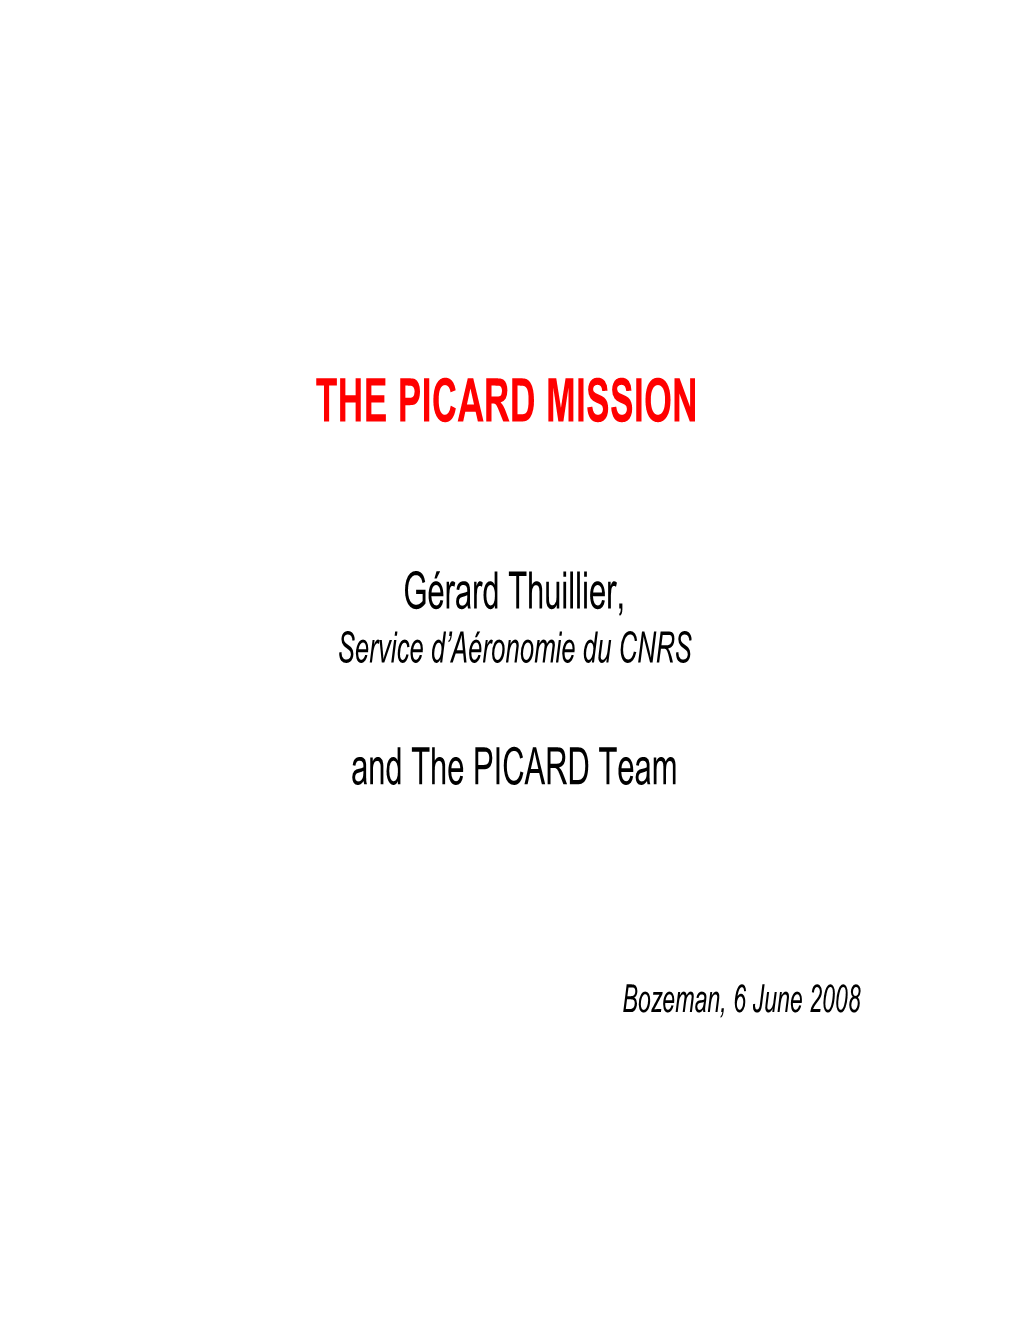 The Picard Mission